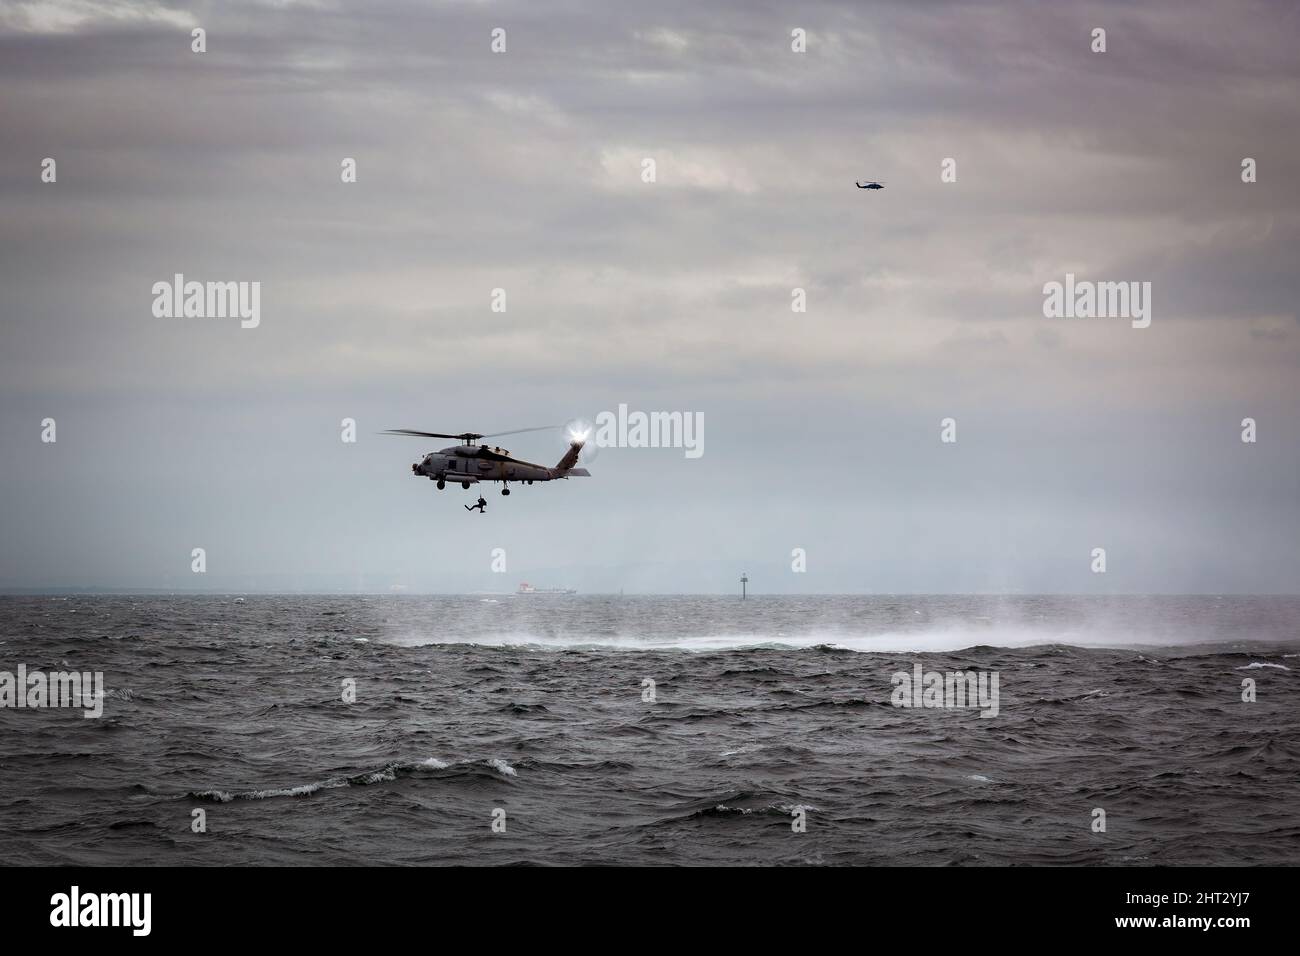 US Navy MH-60 helicopters with rescue swimmers practice off the coast near Yokosuka, Japan. Stock Photo